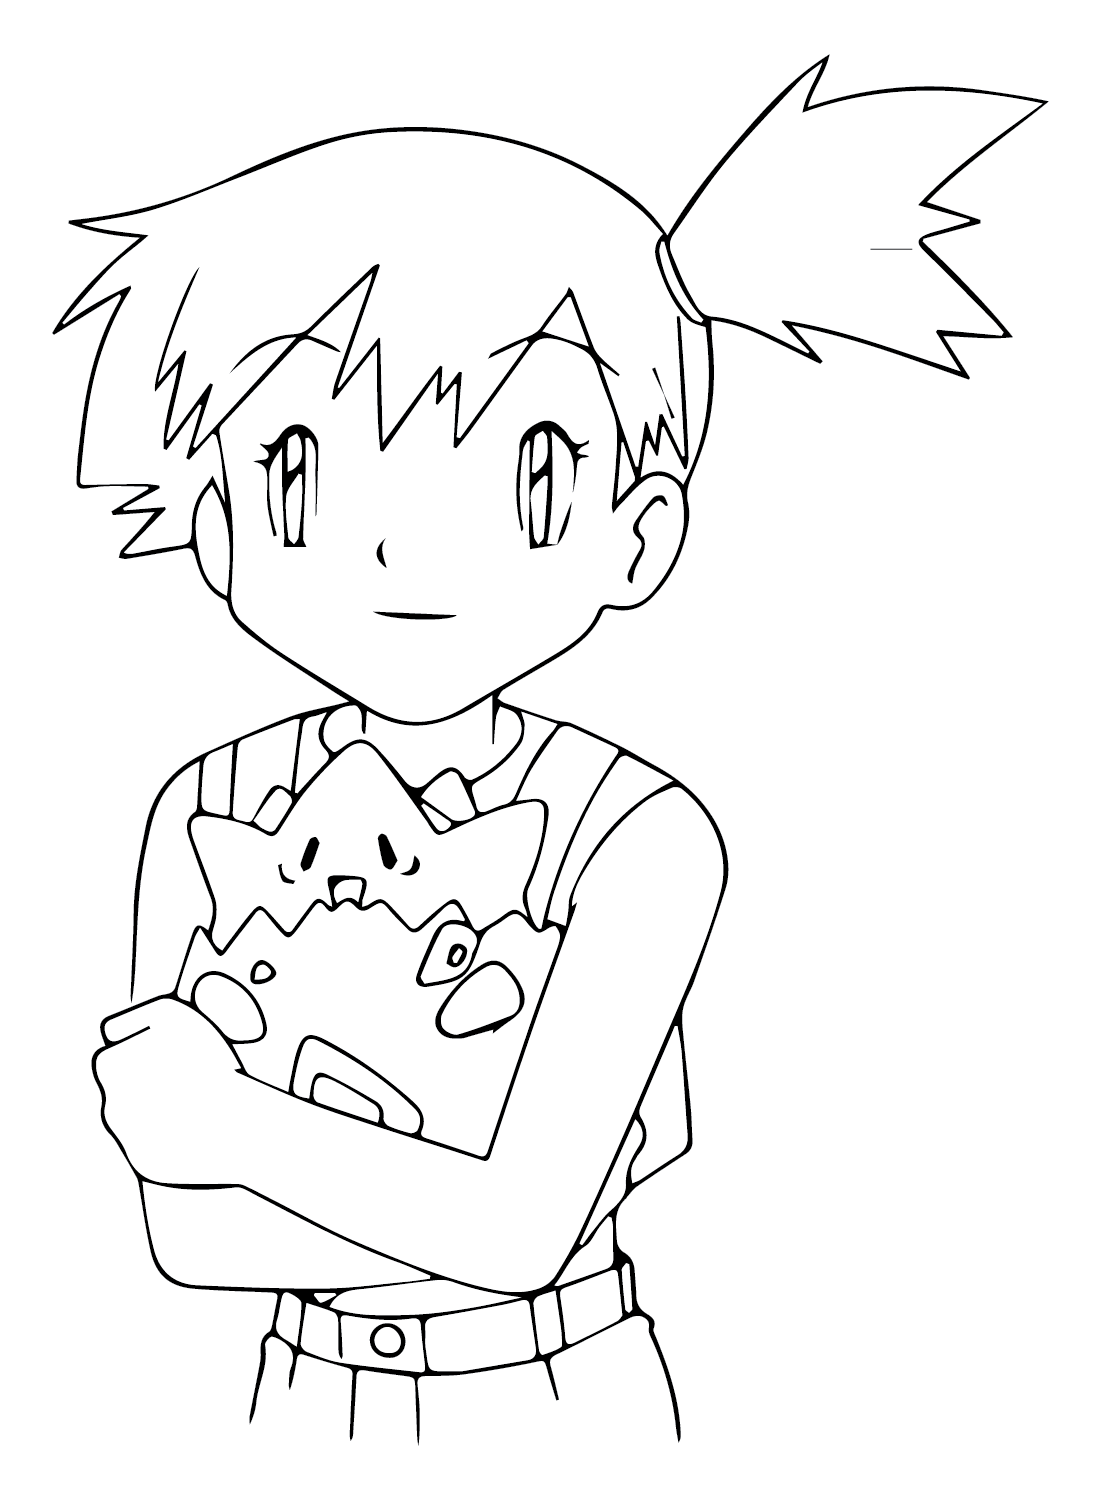 Misty and Togepi Coloring Page from Misty